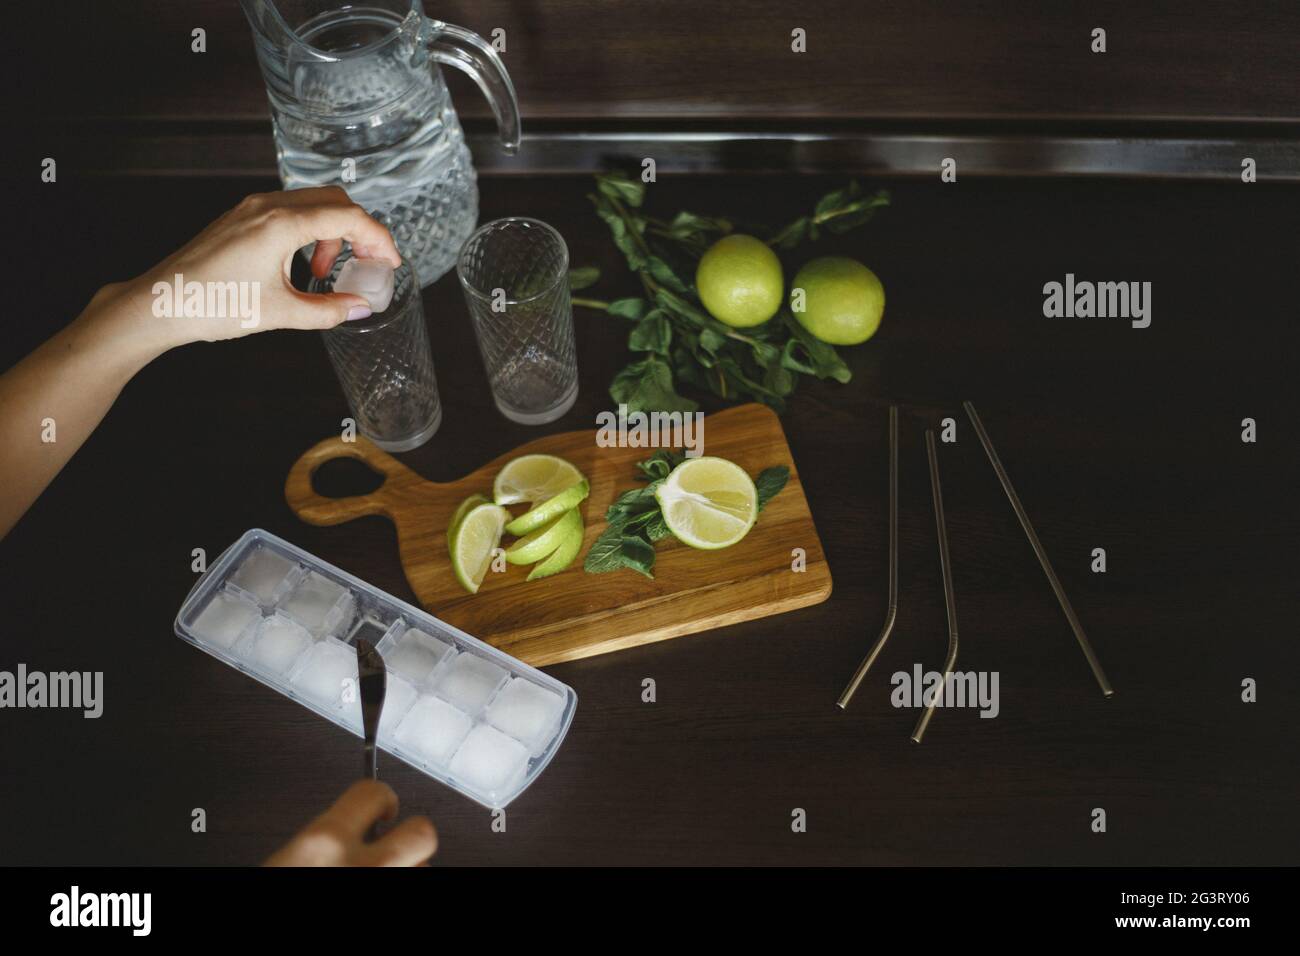 https://c8.alamy.com/comp/2G3RY06/top-view-of-womans-hand-puts-an-ice-cube-in-a-glass-for-mojito-2G3RY06.jpg